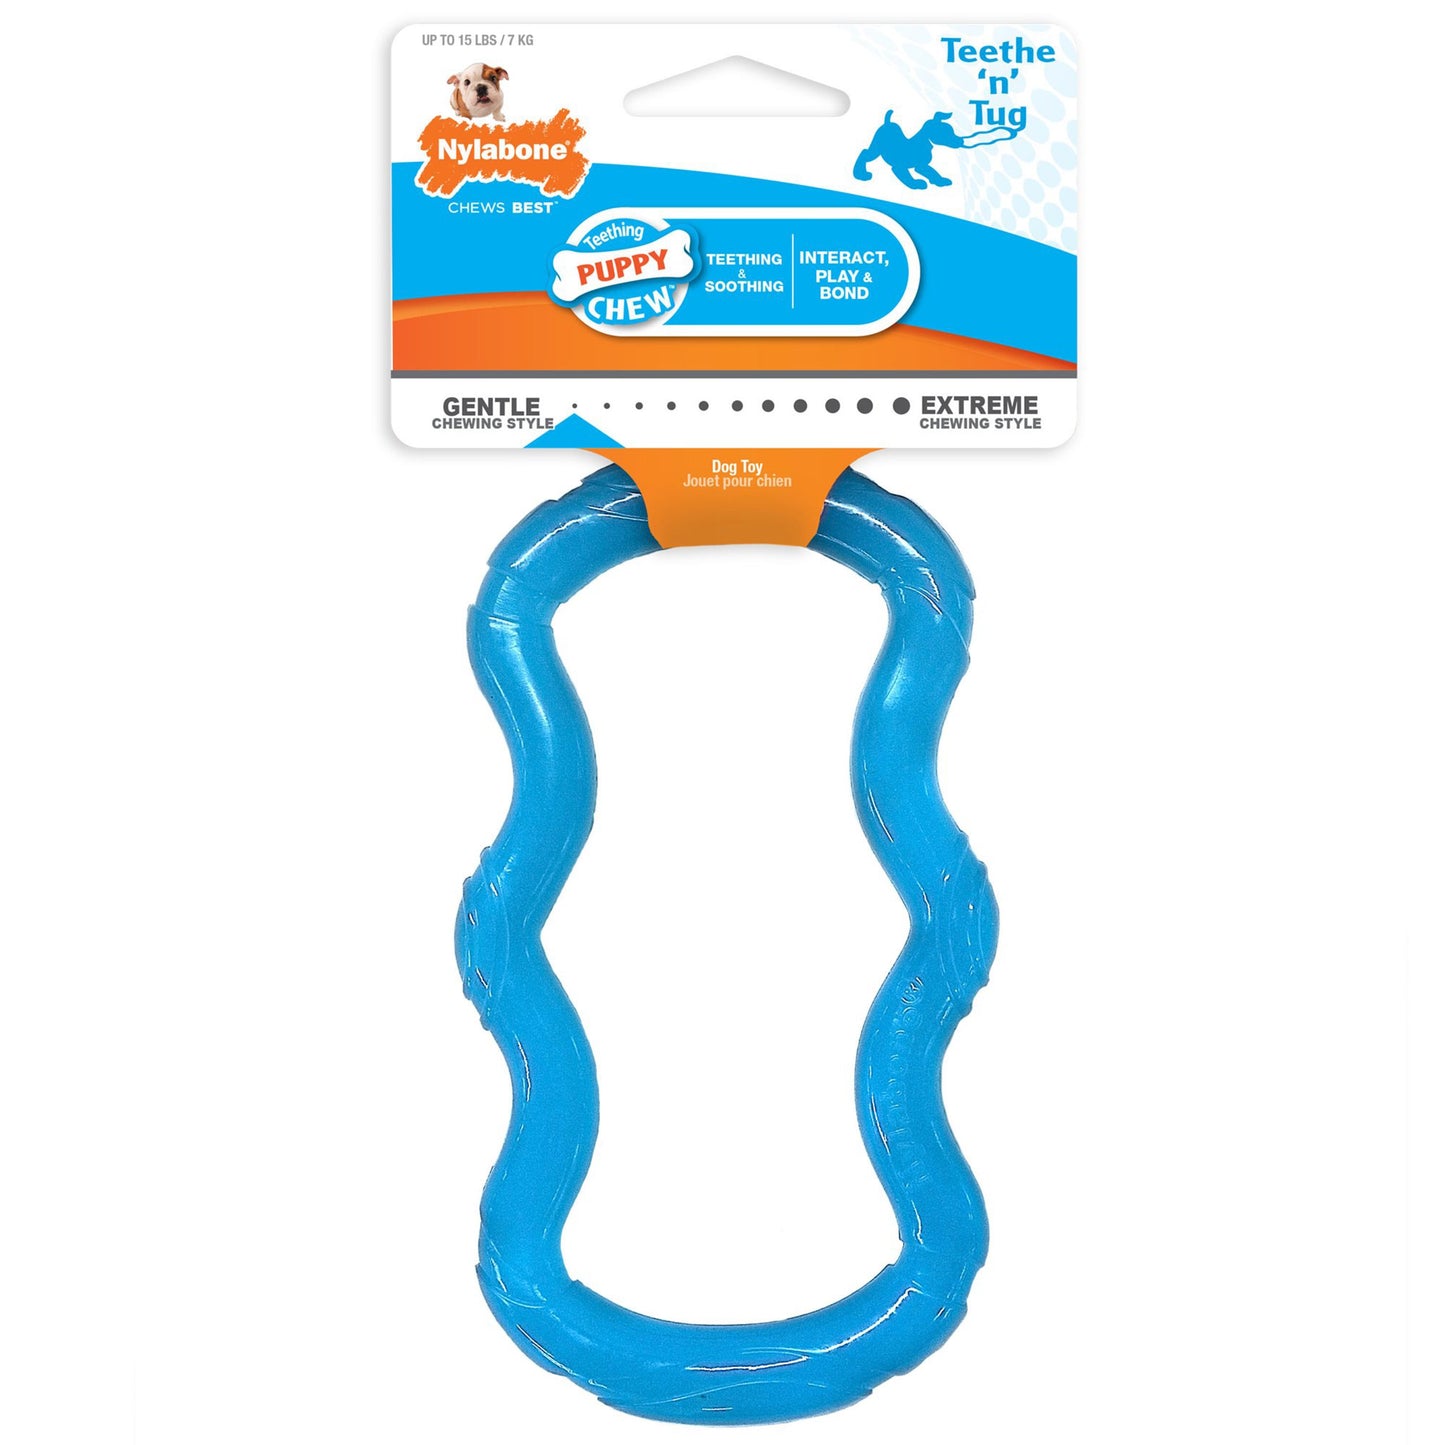 Nylabone Puppy Chew Toy, Teething Toy for Puppies, Puppy Tug Toy Tug Toy, XS/Petite (1 ct), Nylabone